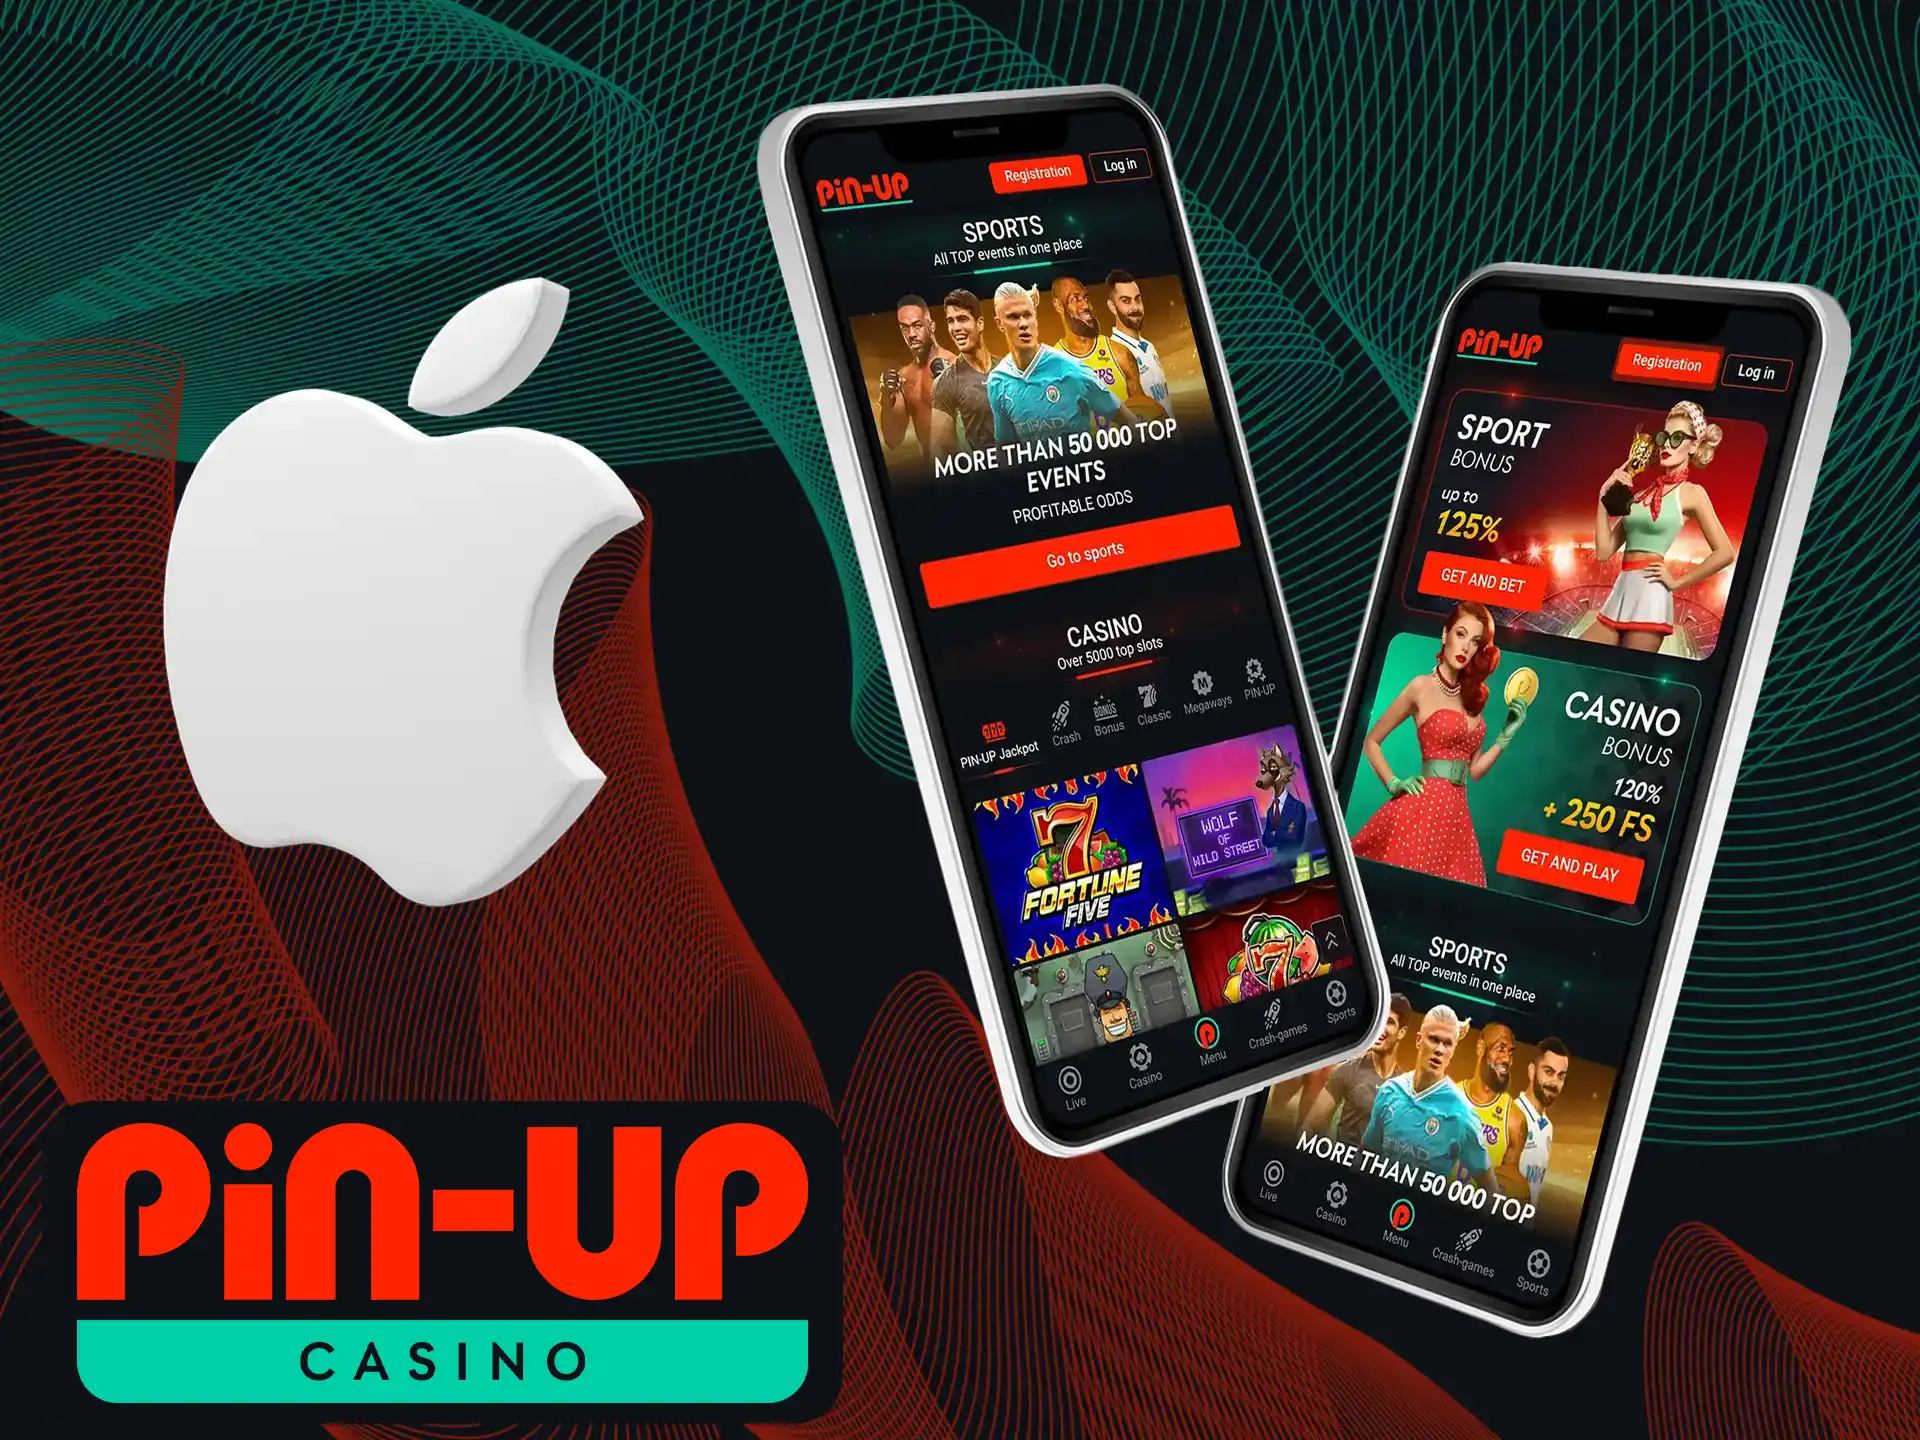 Pin-Up Casino apk can run on a wide range of iOS devices.